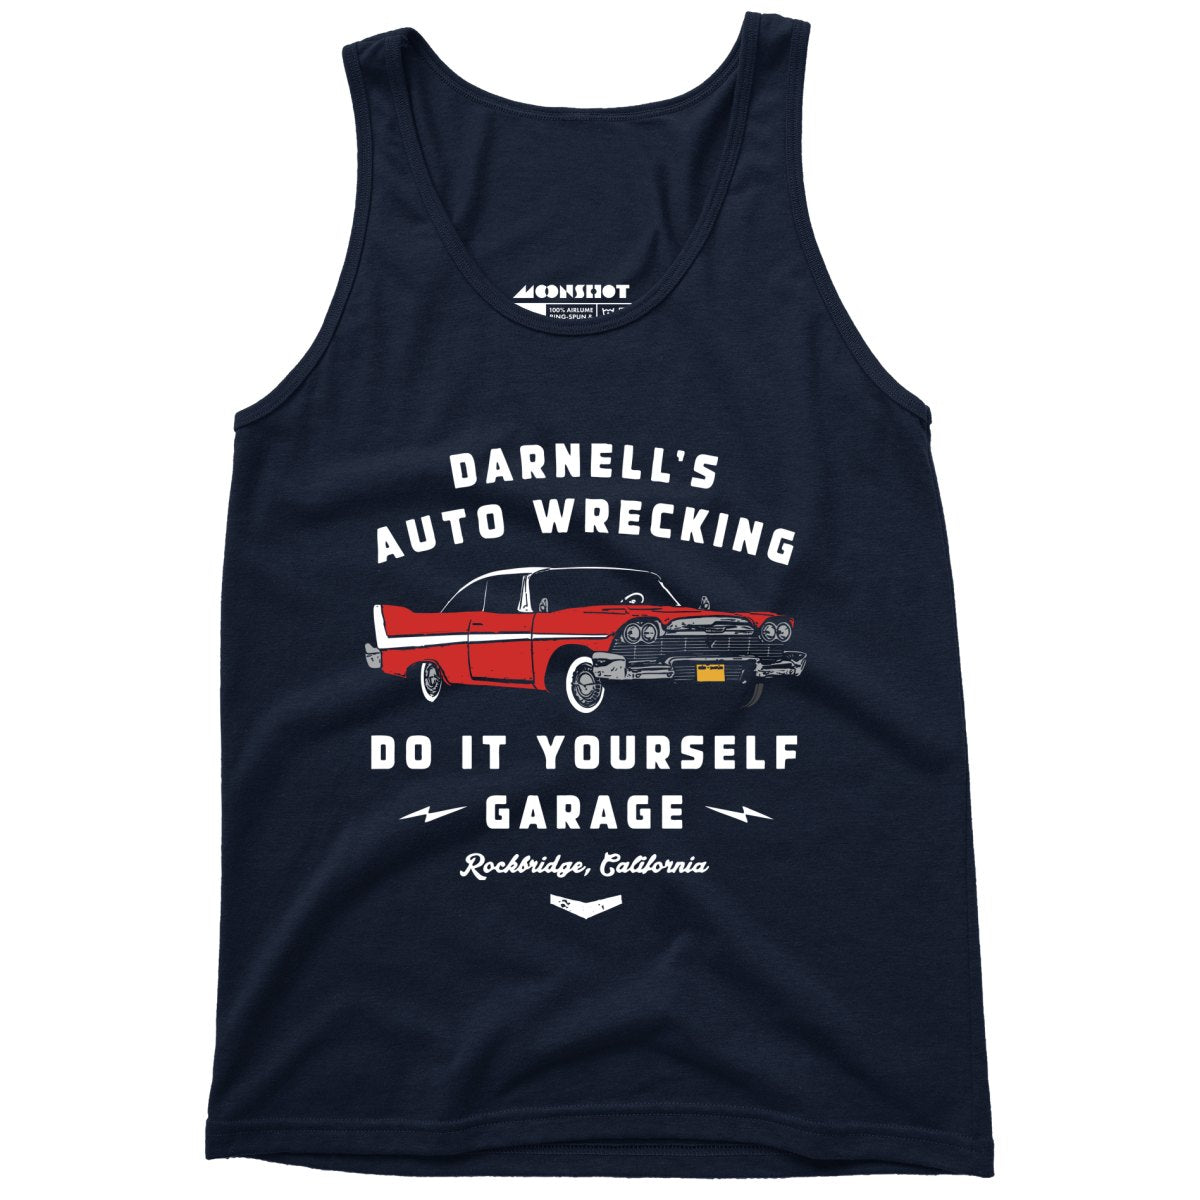 Darnell's Auto Wrecking - Do it Yourself Garage - Unisex Tank Top